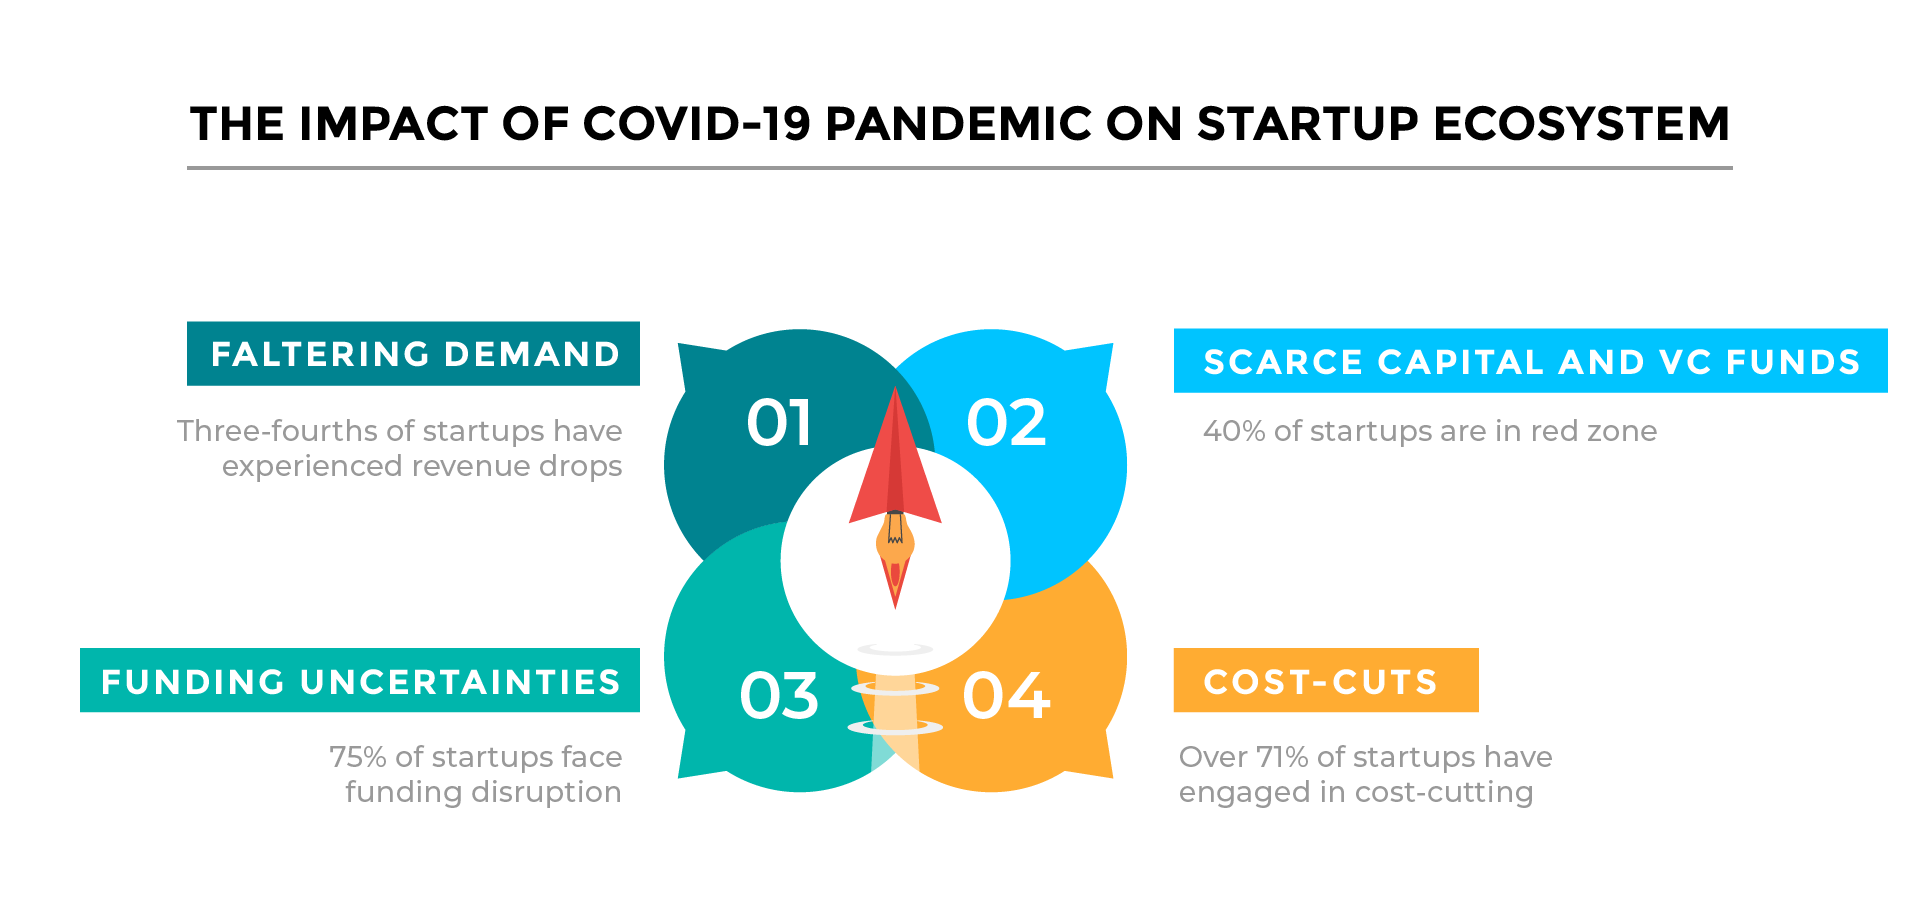 The Impact of COVID-19 Pandemic on Startup Ecosystem